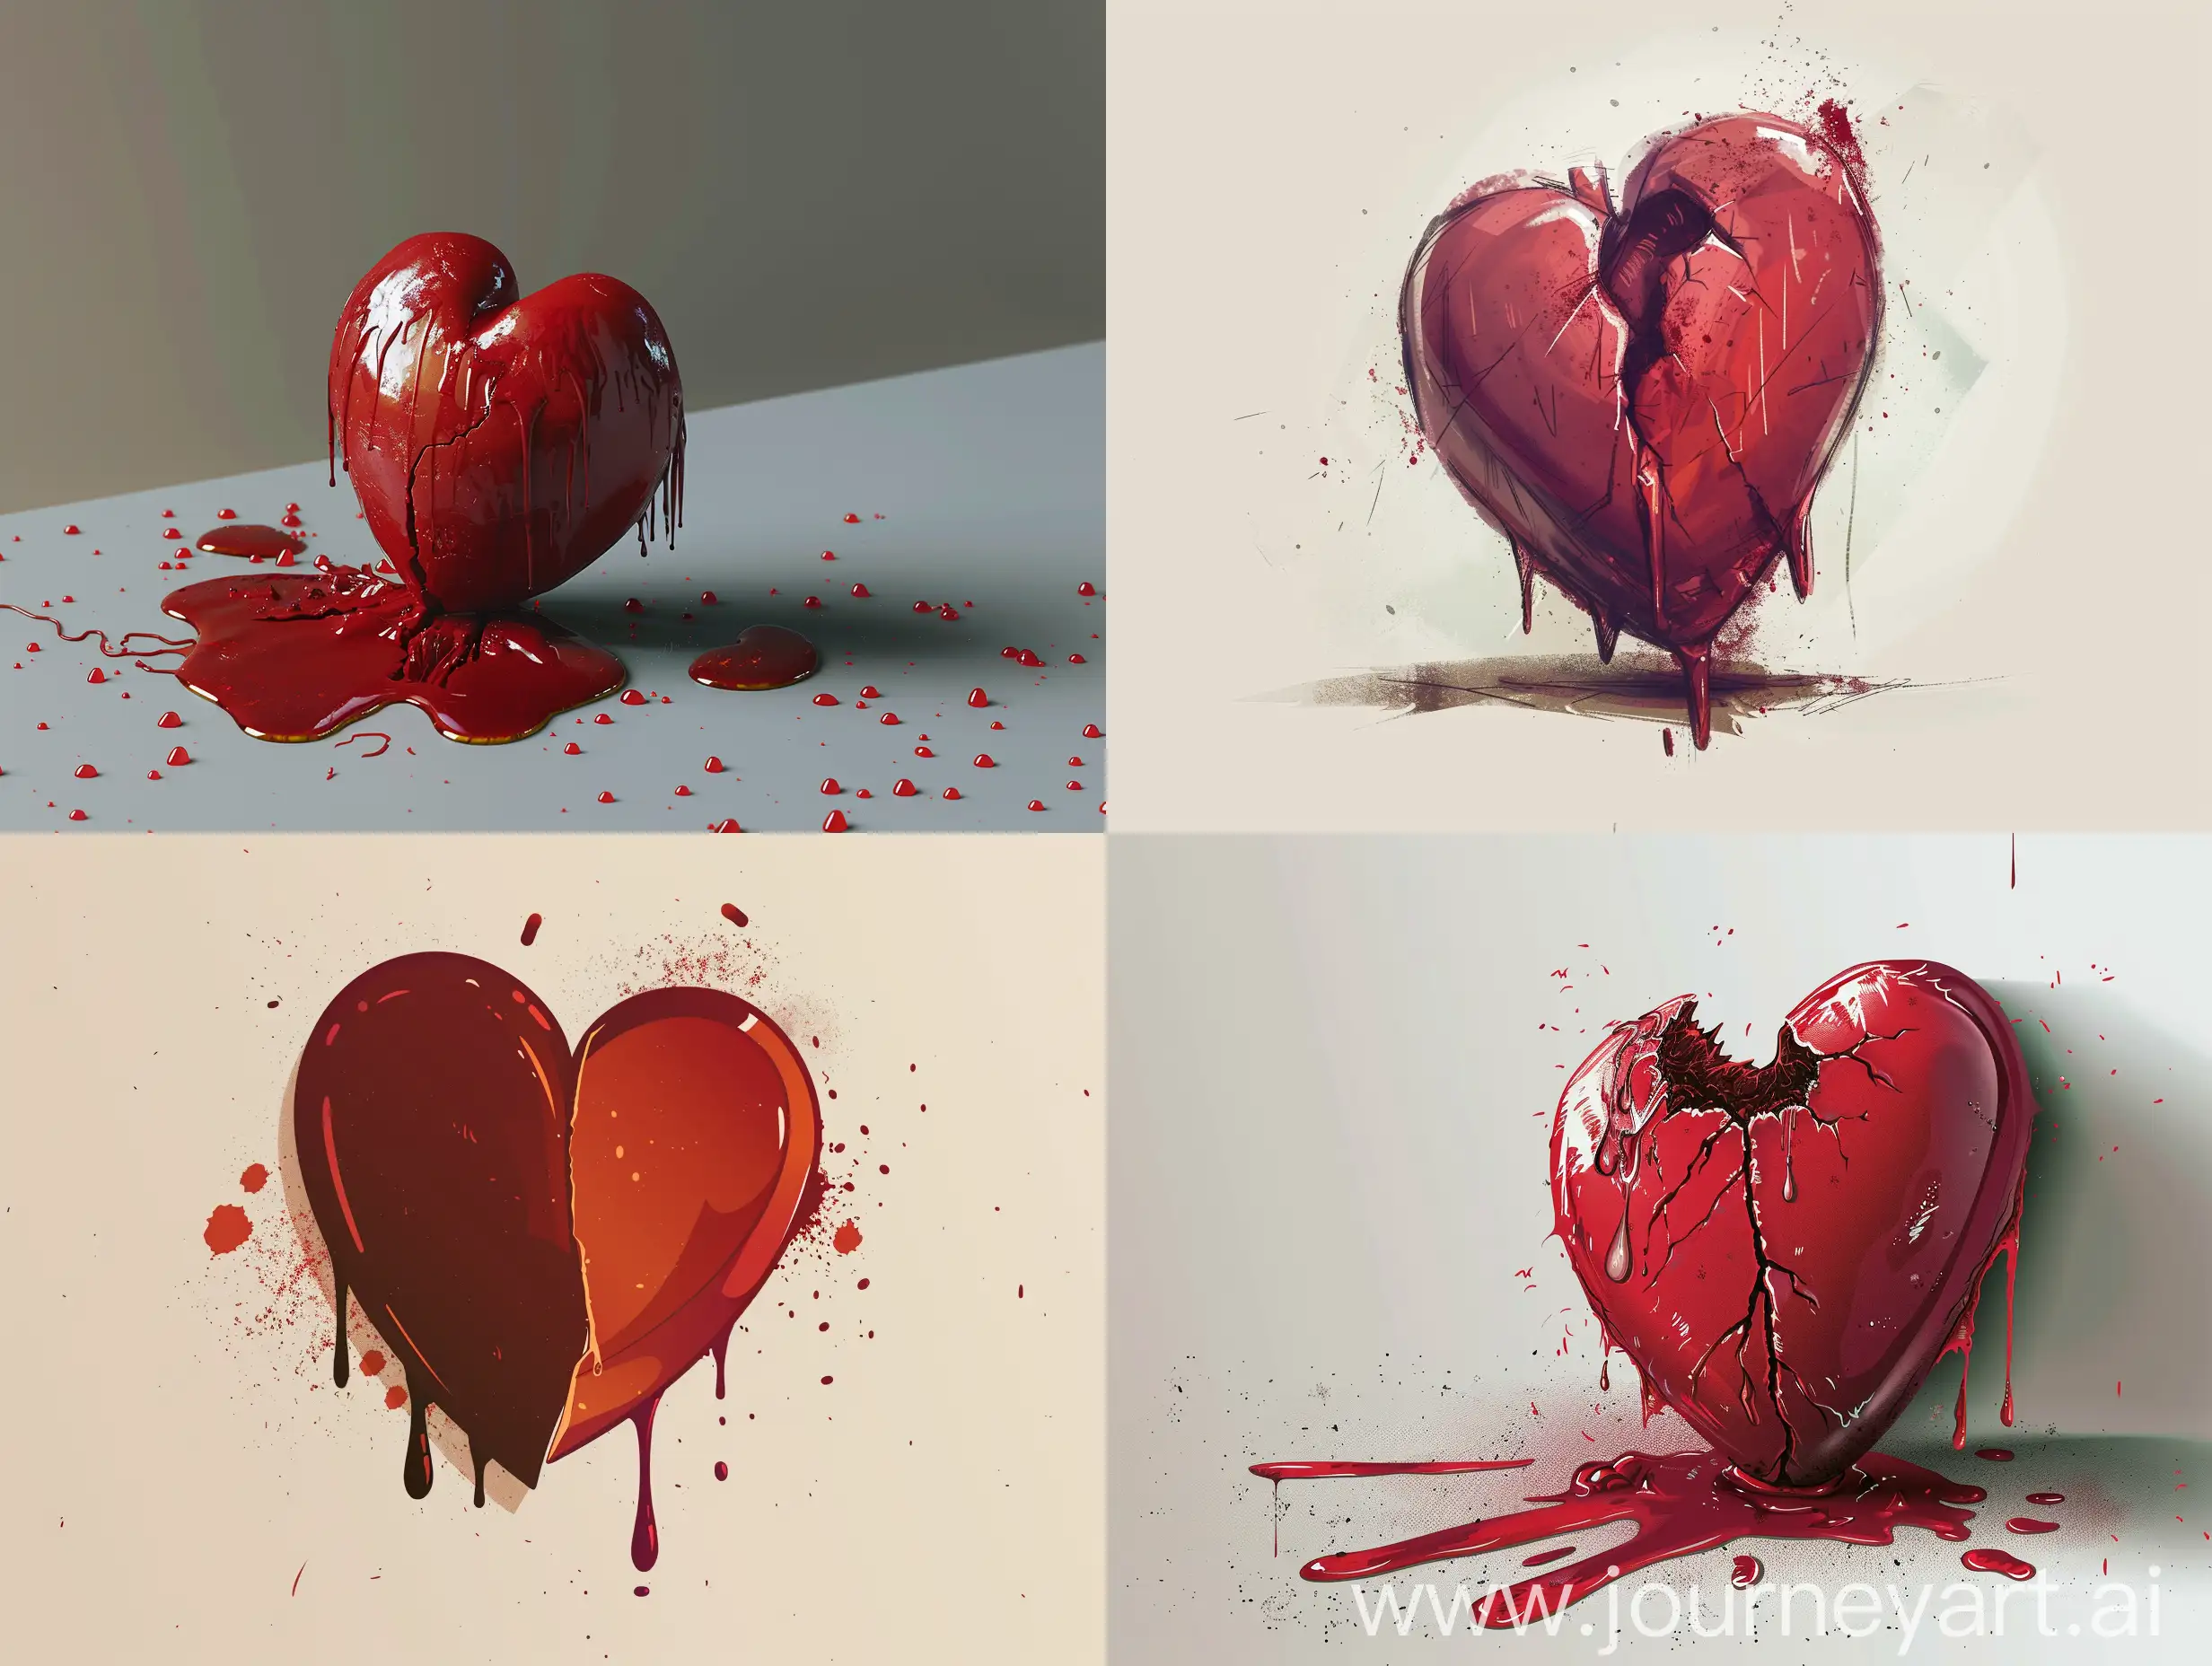 Delicate-Heart-with-Subtle-Blood-Drips-A-Visual-Poem-on-Fragility-and-Strength